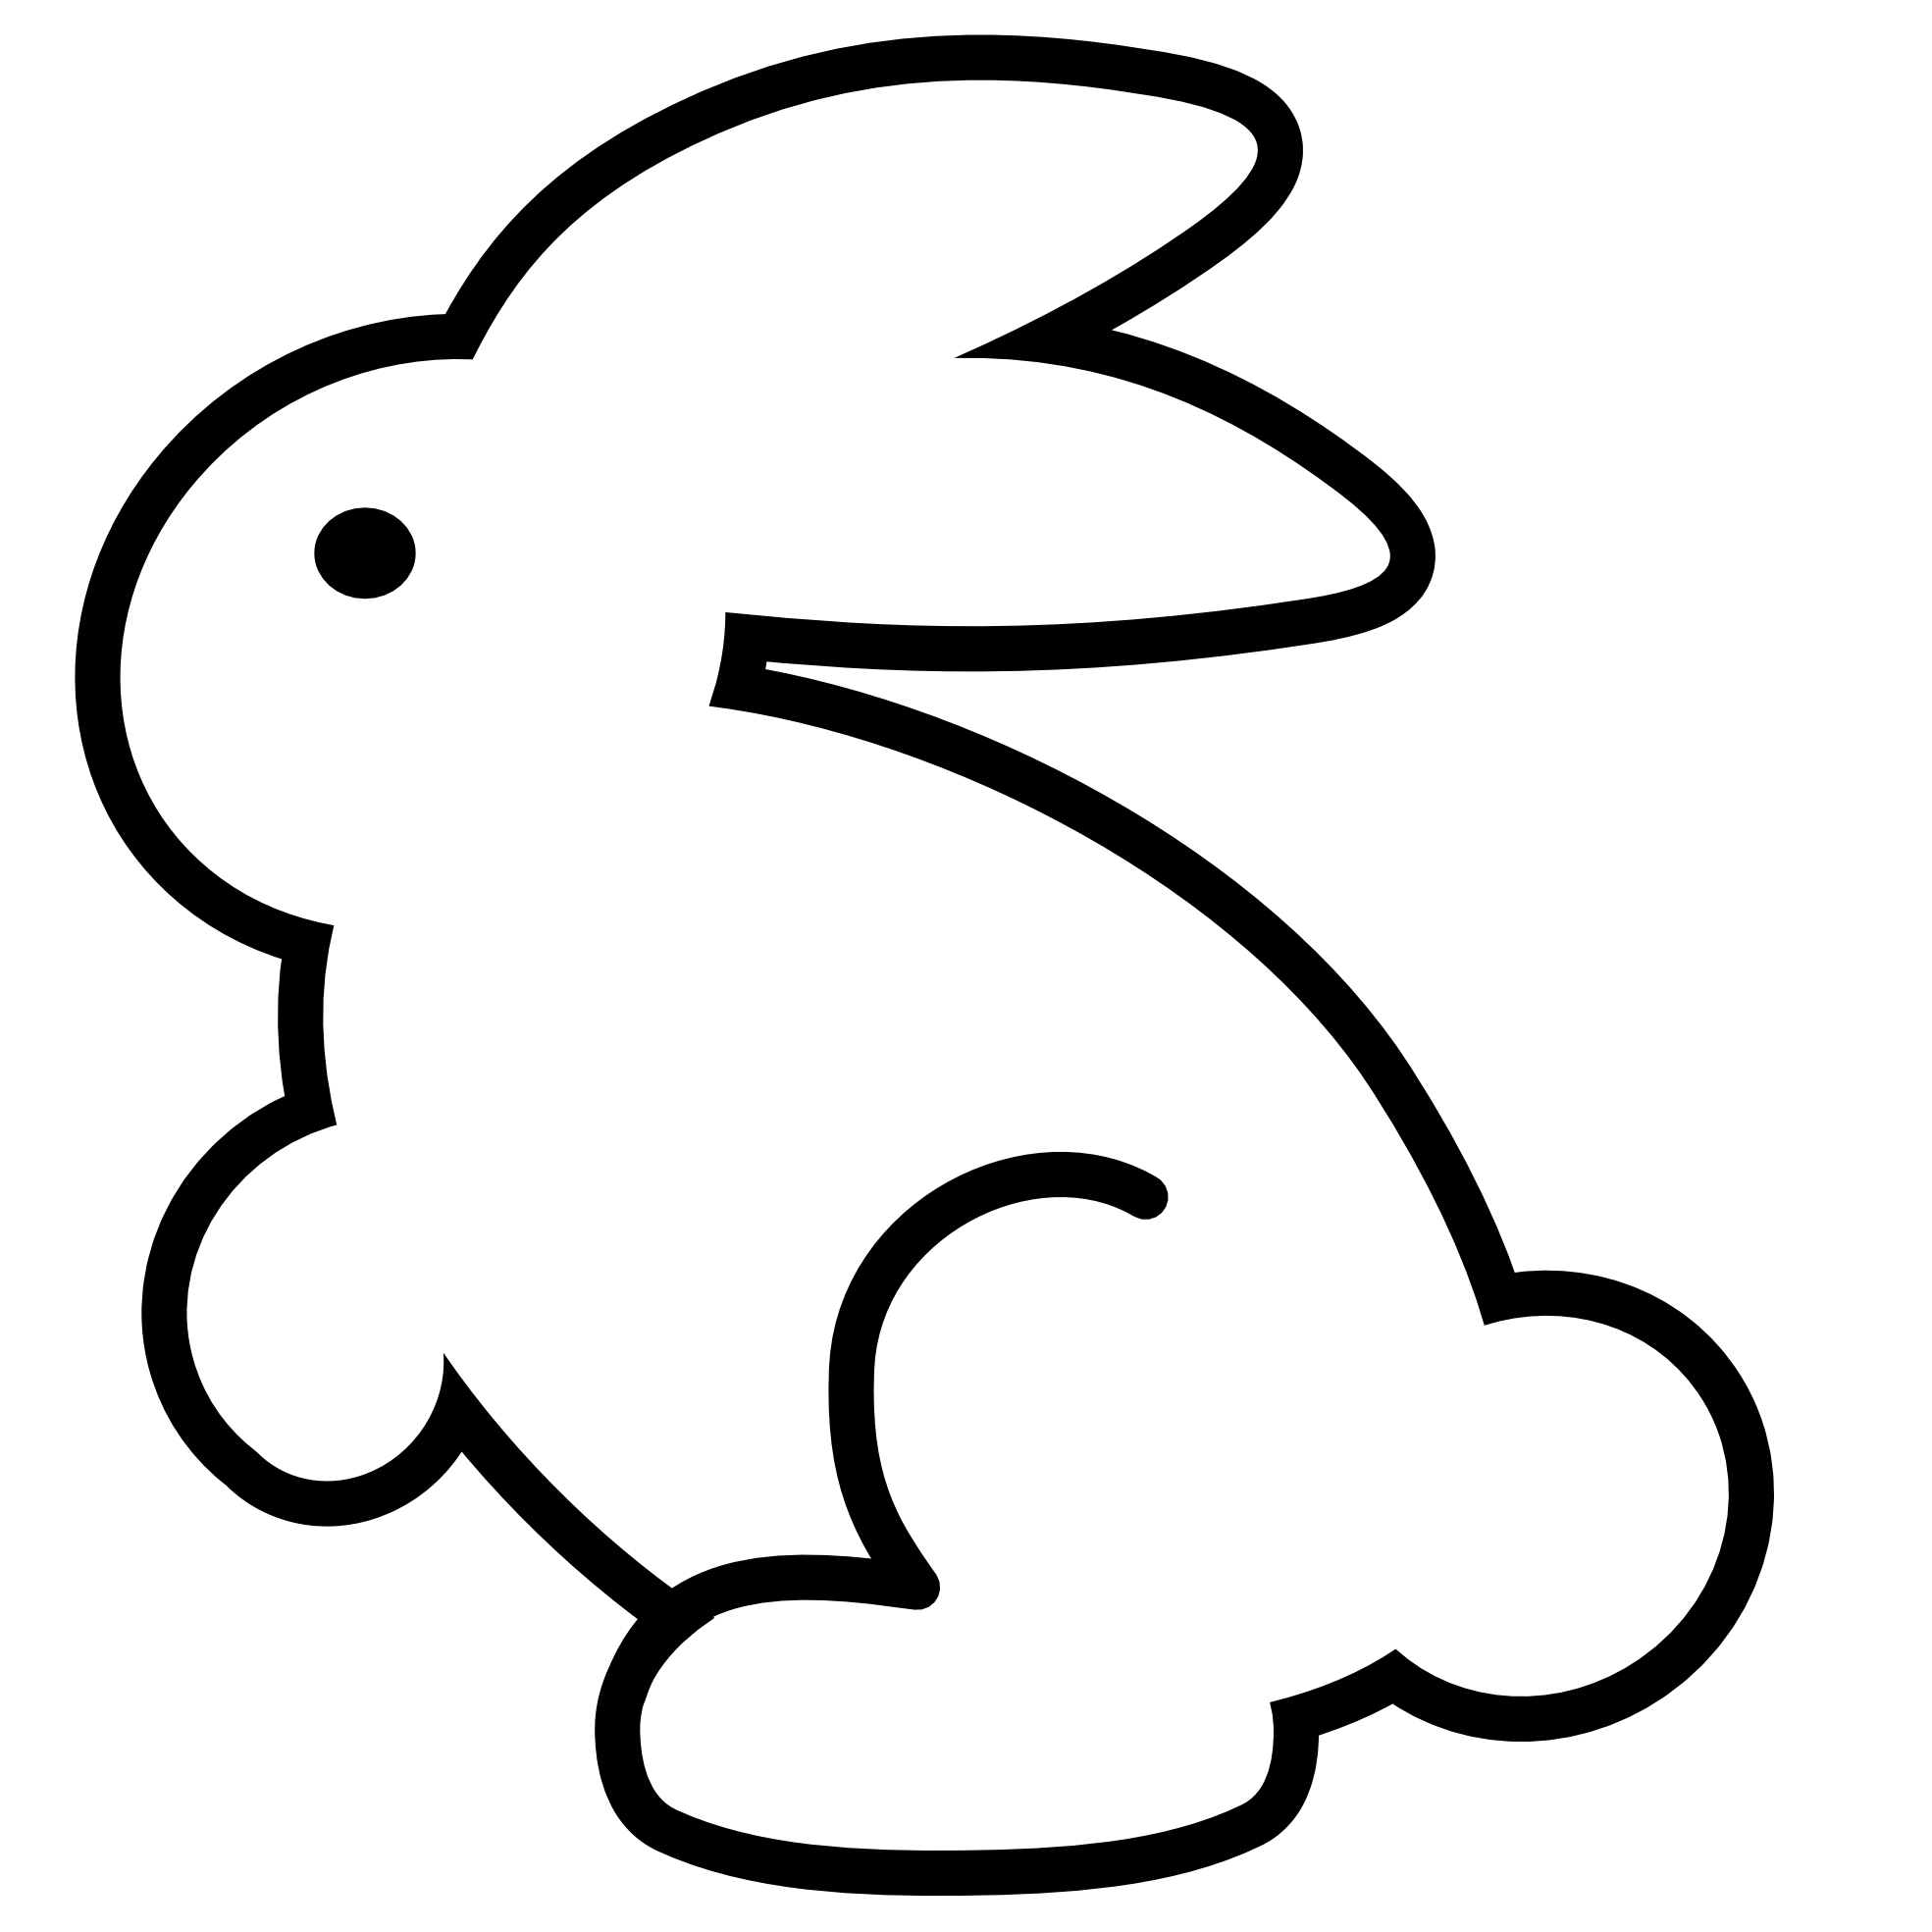 ... Bunny Icon Black White Line Art Scalable Vector Graphics SVG Inkscape Adobe Illustrator Clip Art Clipart Coloring Book Colouring 1969px.png 124(K) ...